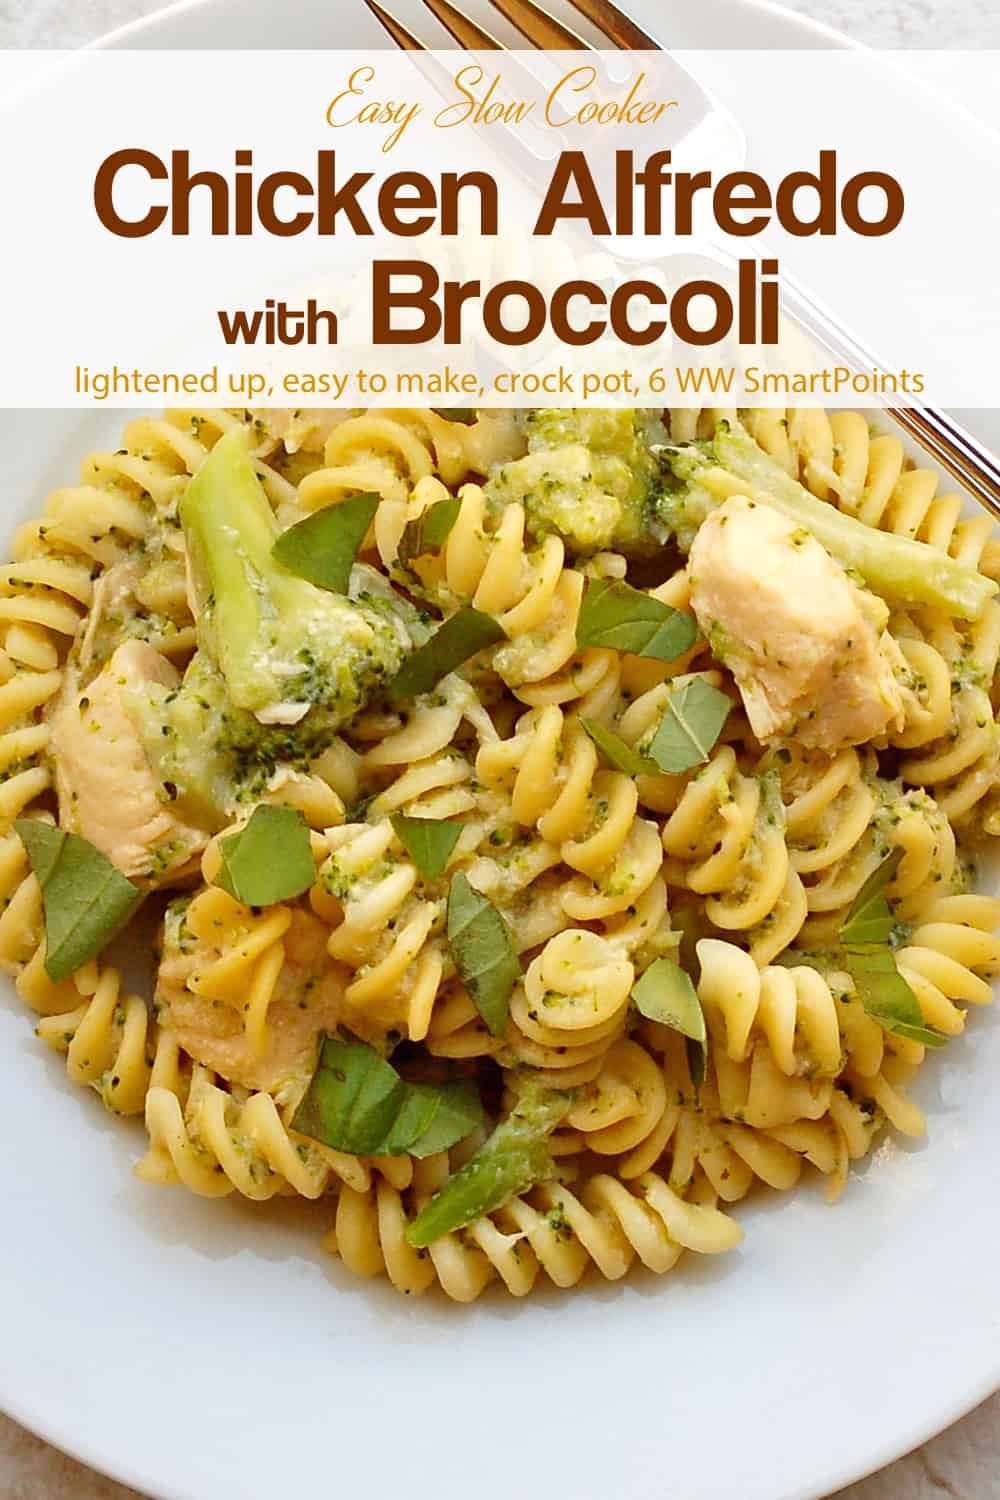 Easy Slow Cooker Chicken Alfredo with Broccoli | Simple Nourished Living